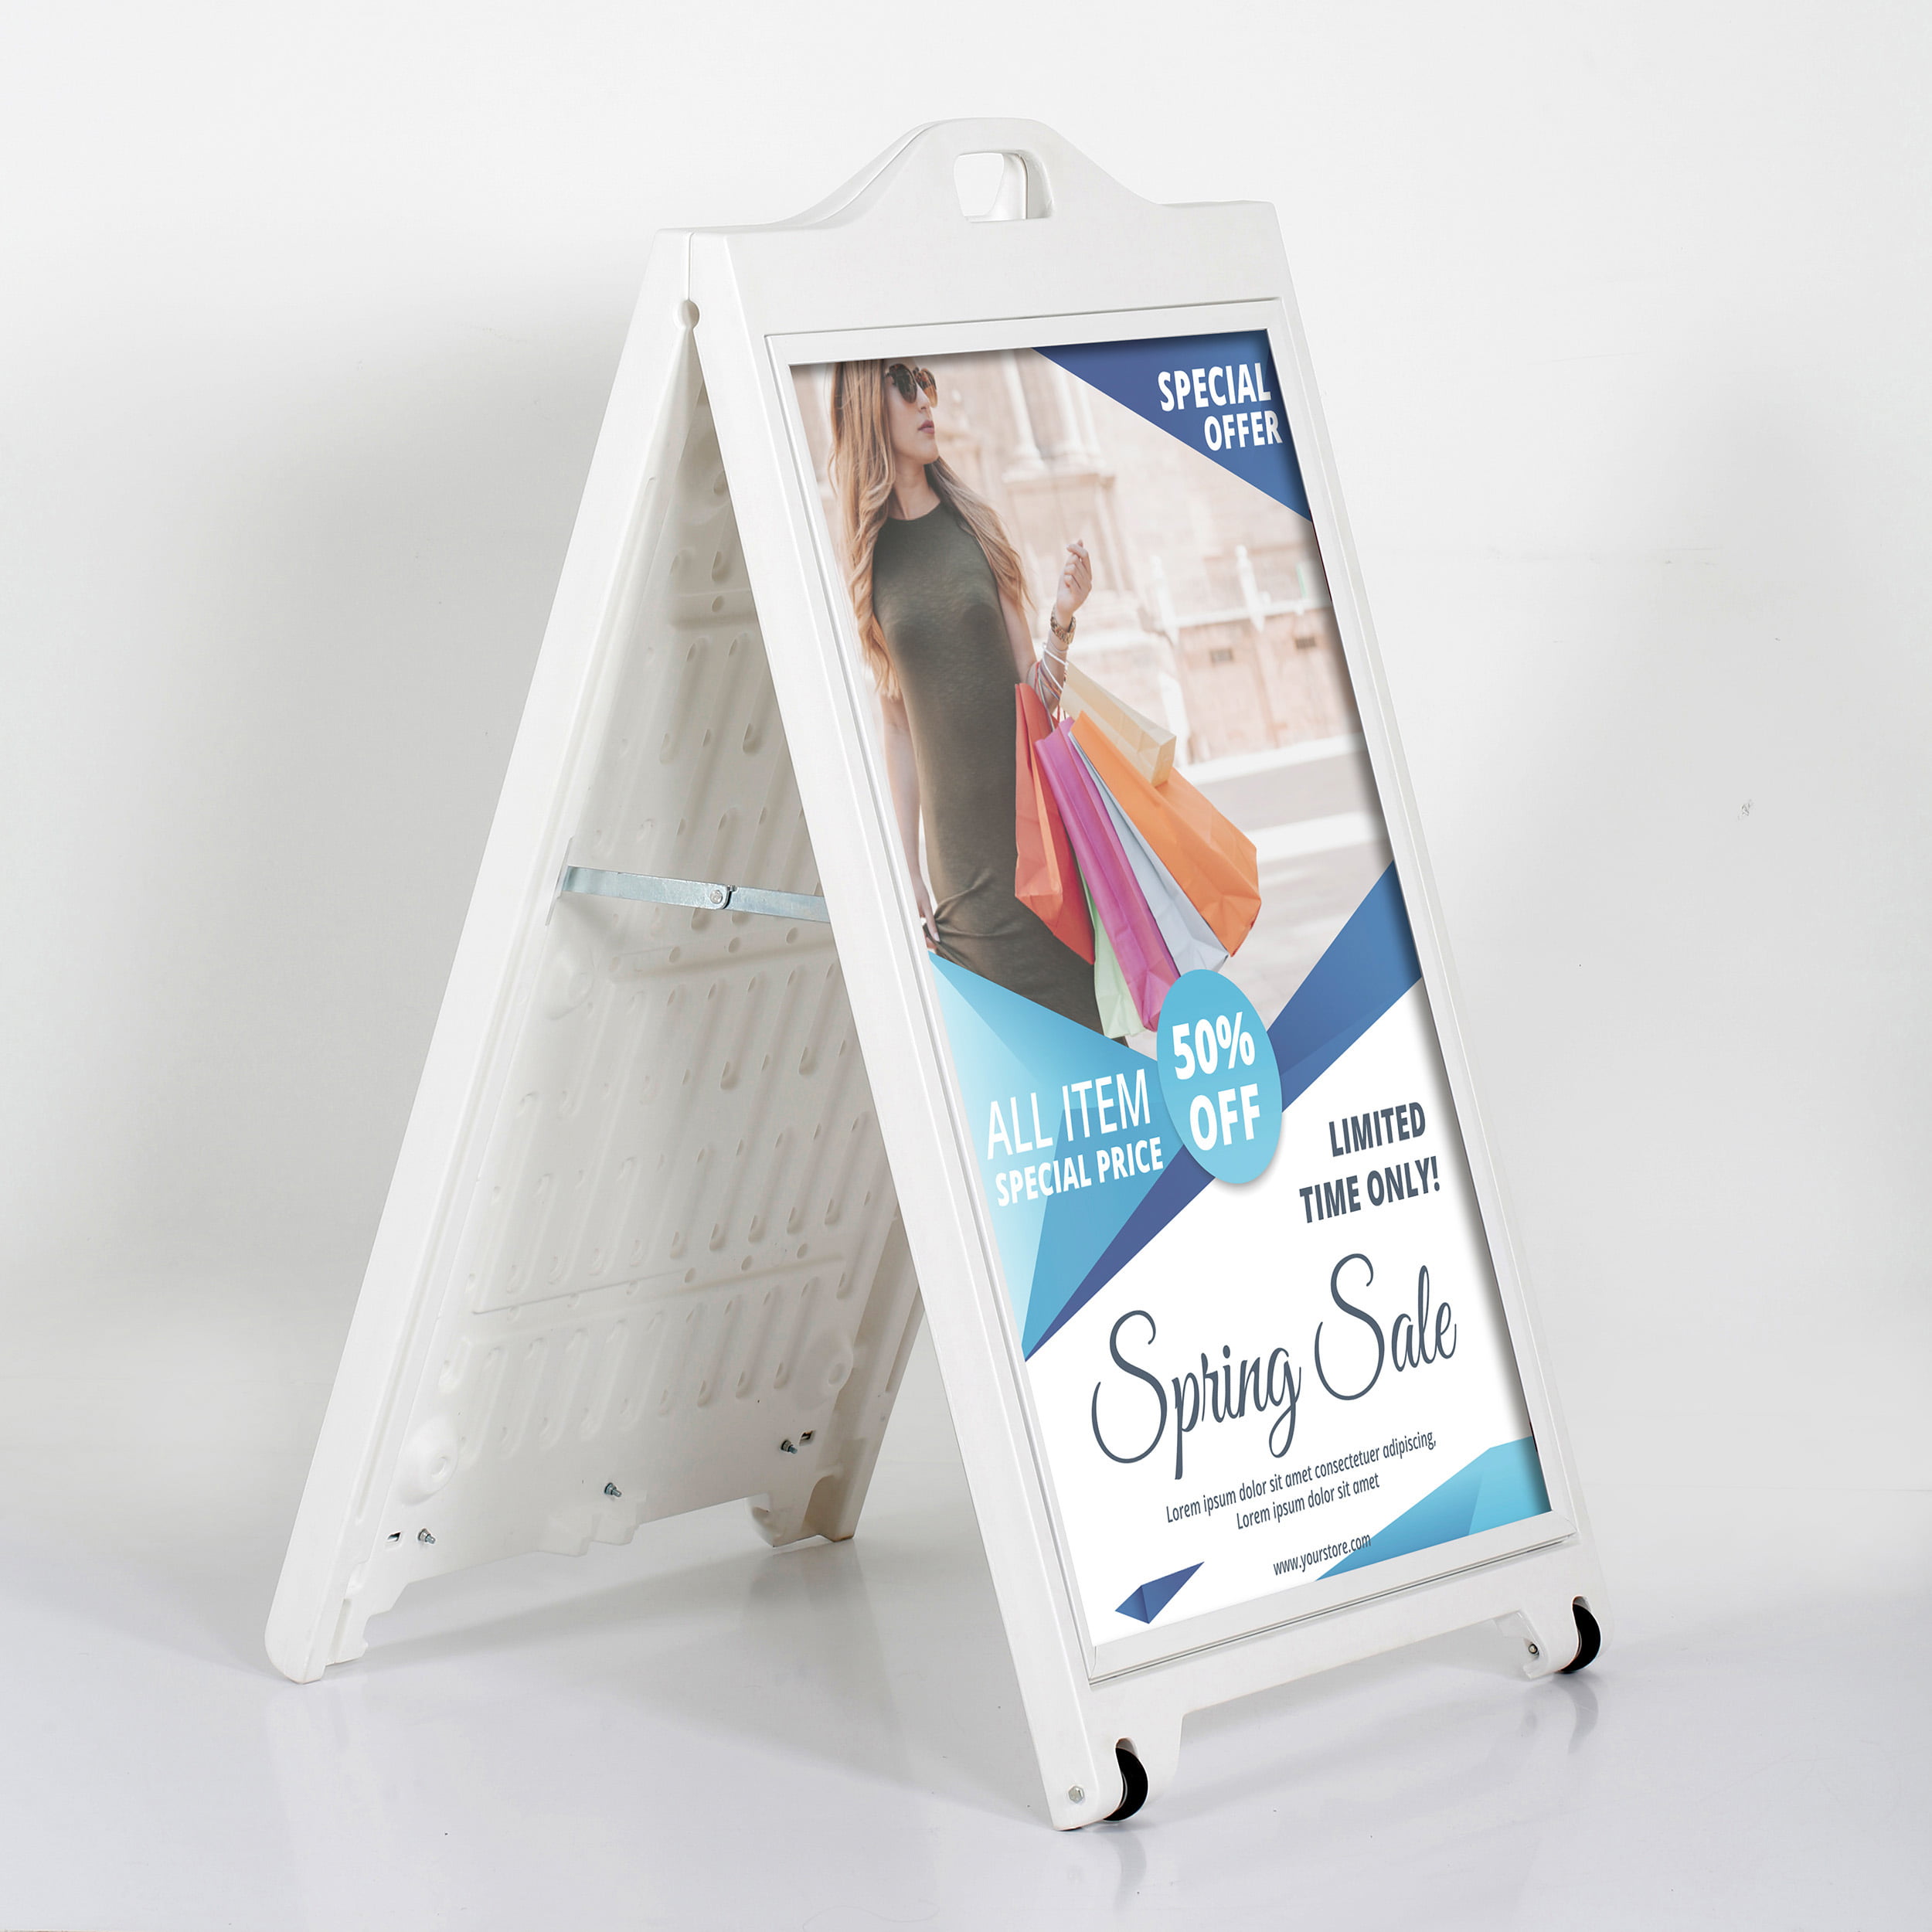 A-Frame Sidewalk Sign Board Curb Sign 24x36 inch Slide in Double Sided Display Foldable and Portable Comes with Carry Handle Weather Resistant Does Not Fall with Winds Color Black